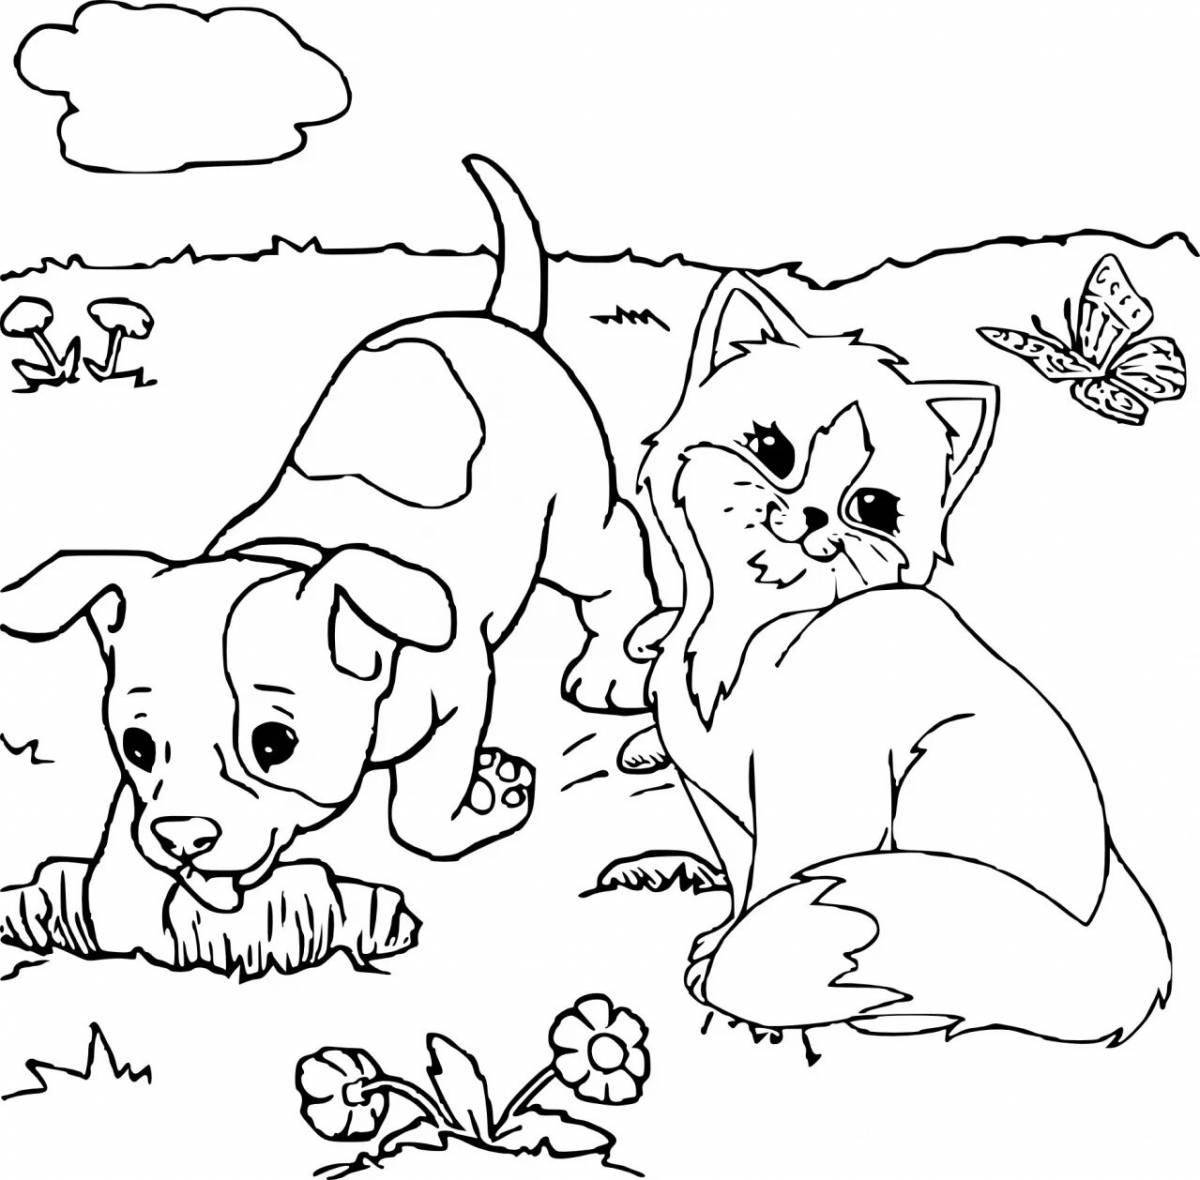 Coloring book calm the cat and the dog together